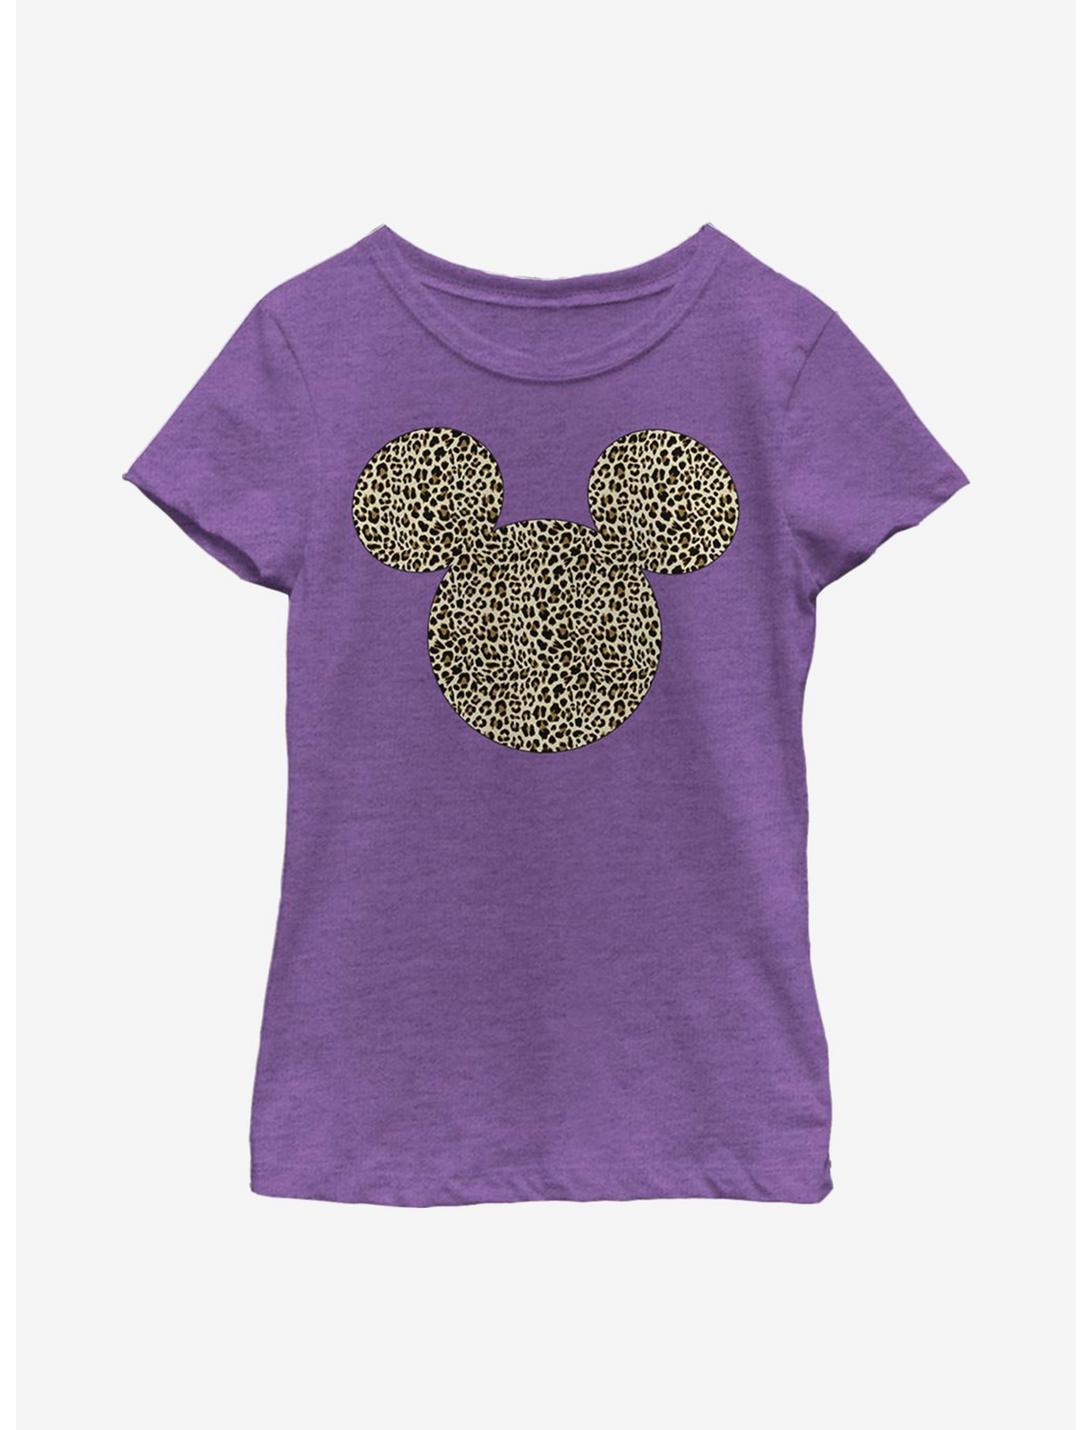 Disney Mickey Mouse Animal Ears Youth Girls T-Shirt, PURPLE BERRY, hi-res